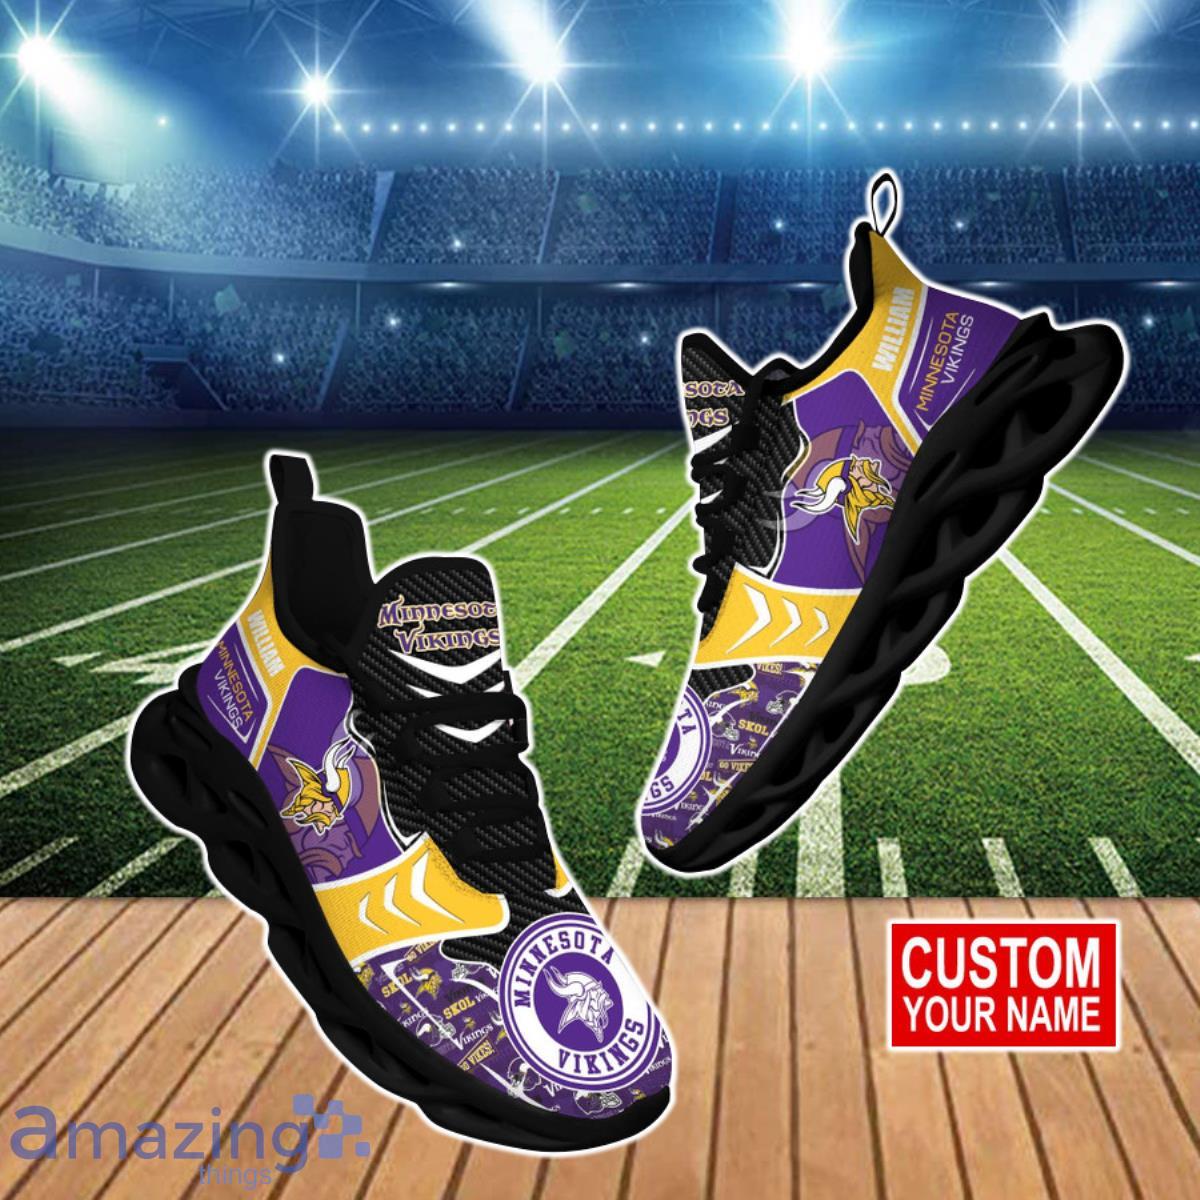 Minnesota Vikings NFL Clunky Max Soul Shoes Custom Name Unique Style For Fans Product Photo 1